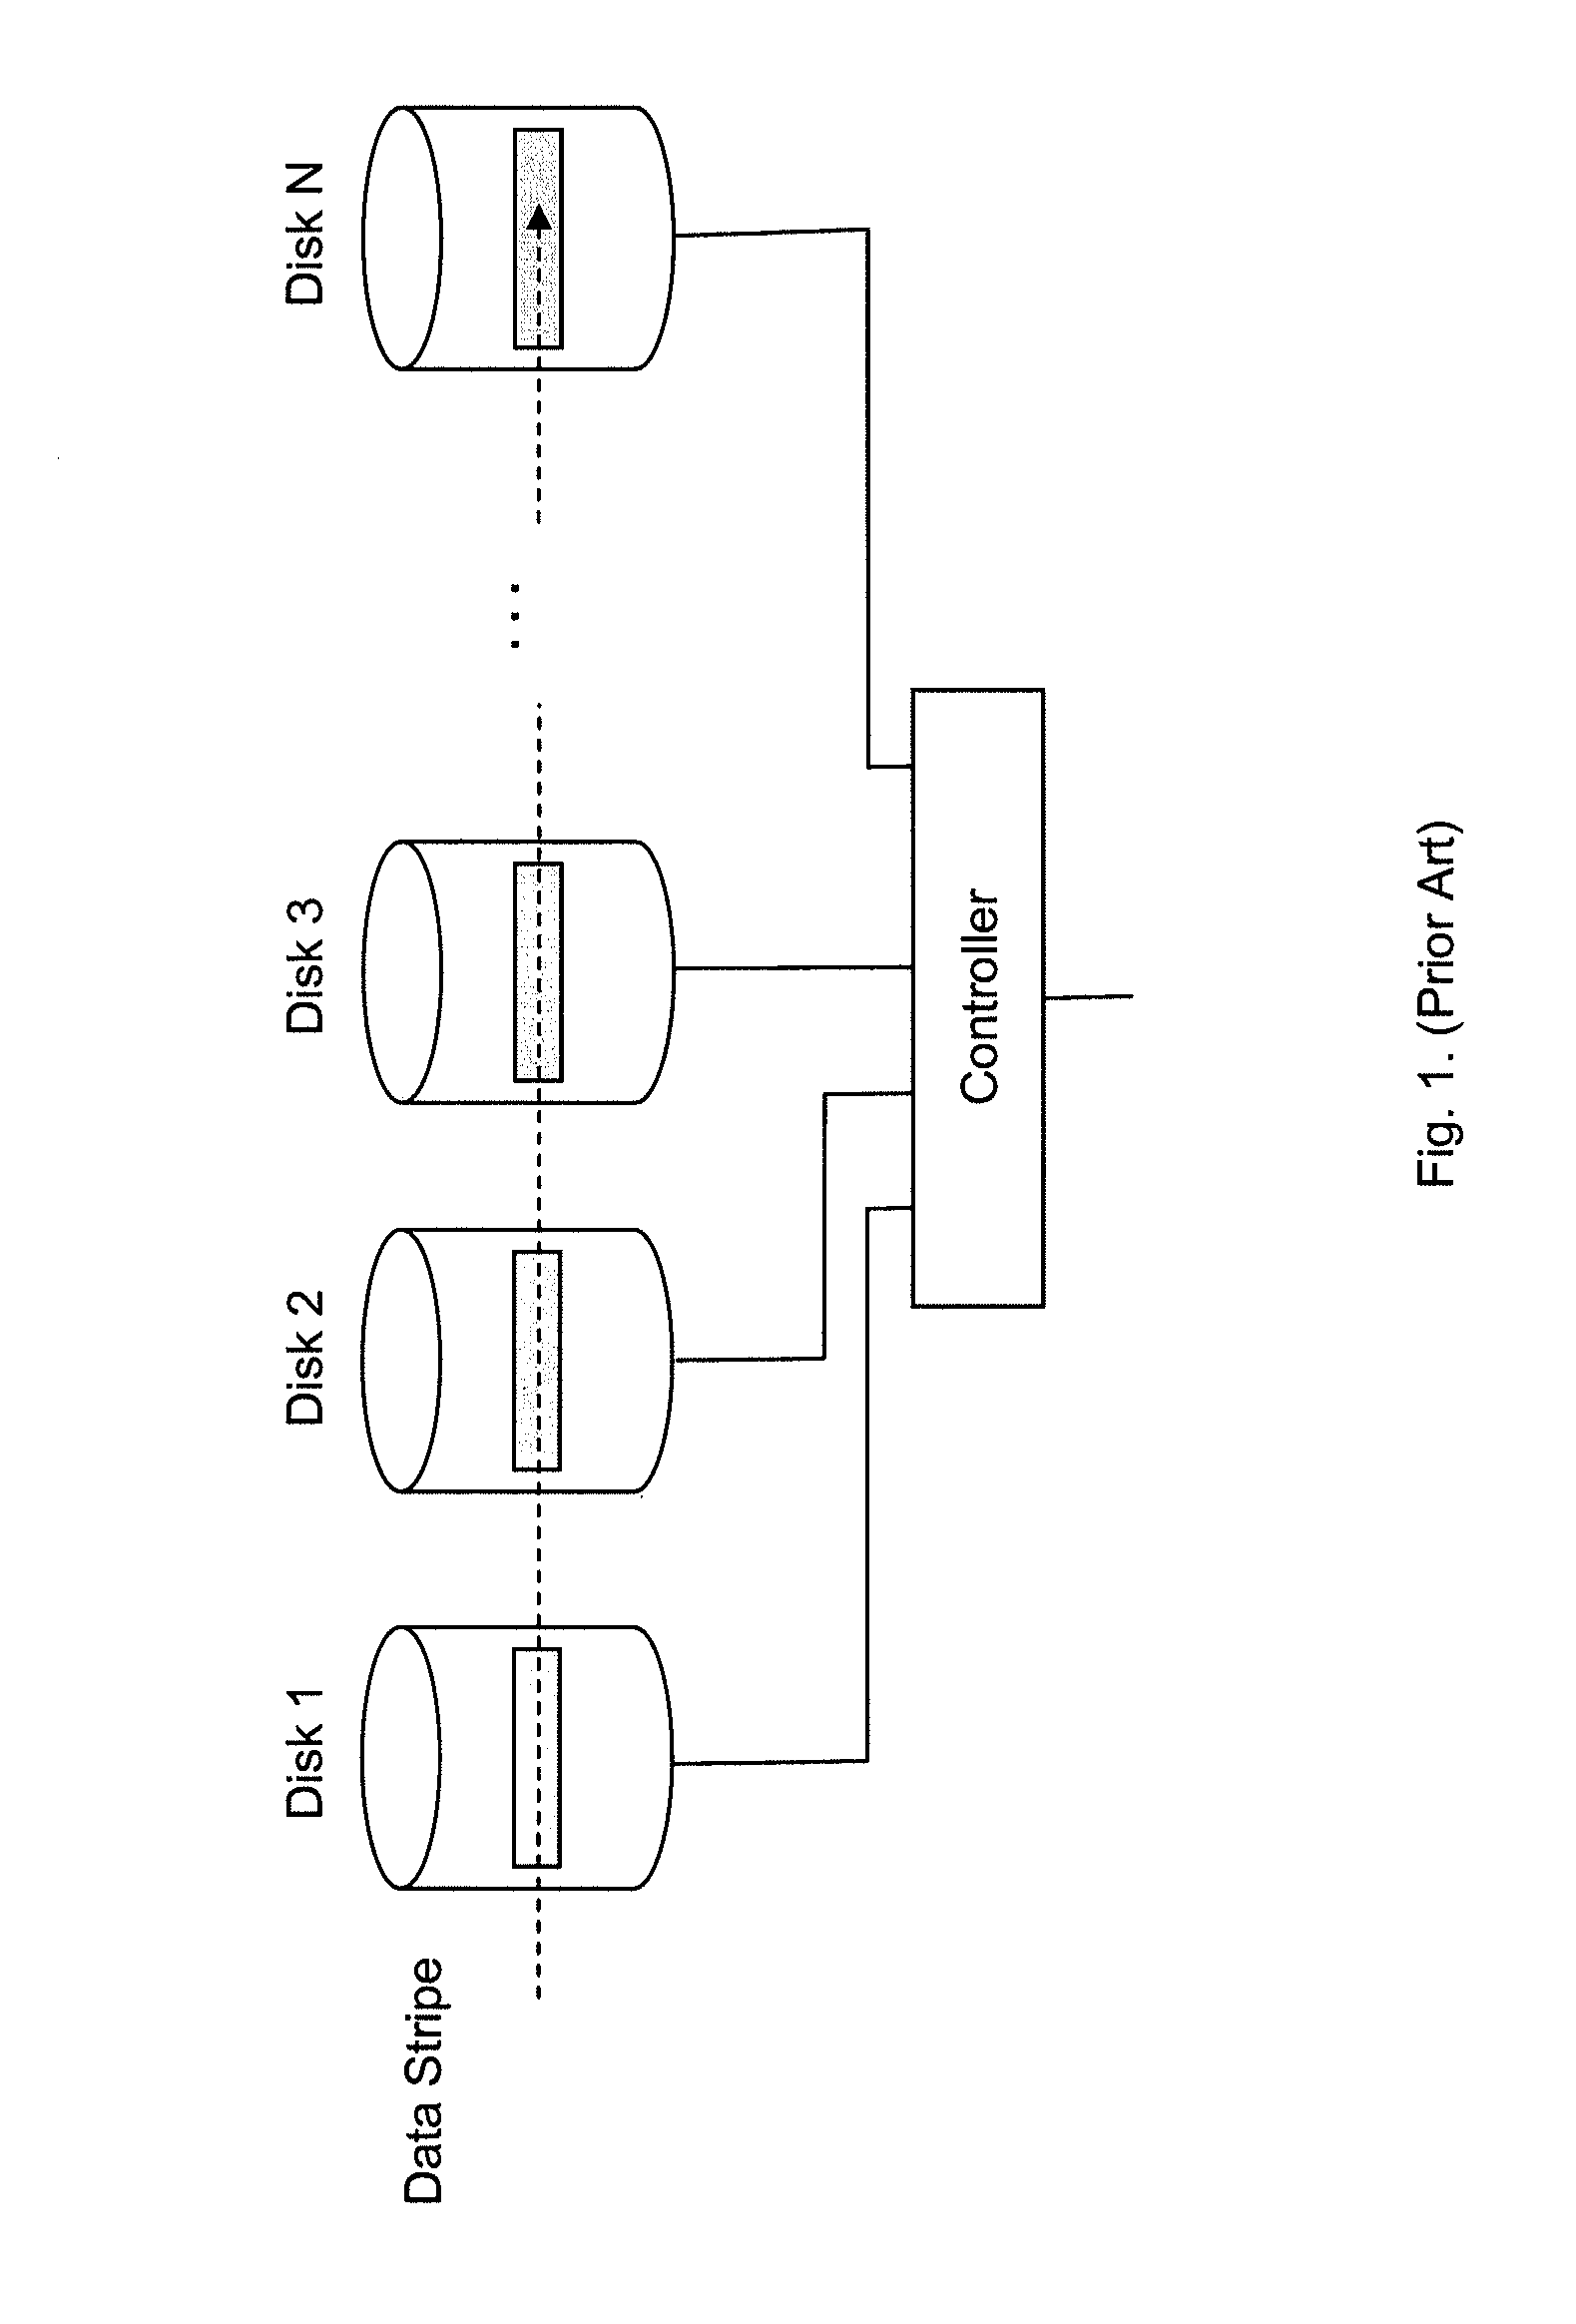 Storage of data utilizing scheduling queue locations associated with different data rates